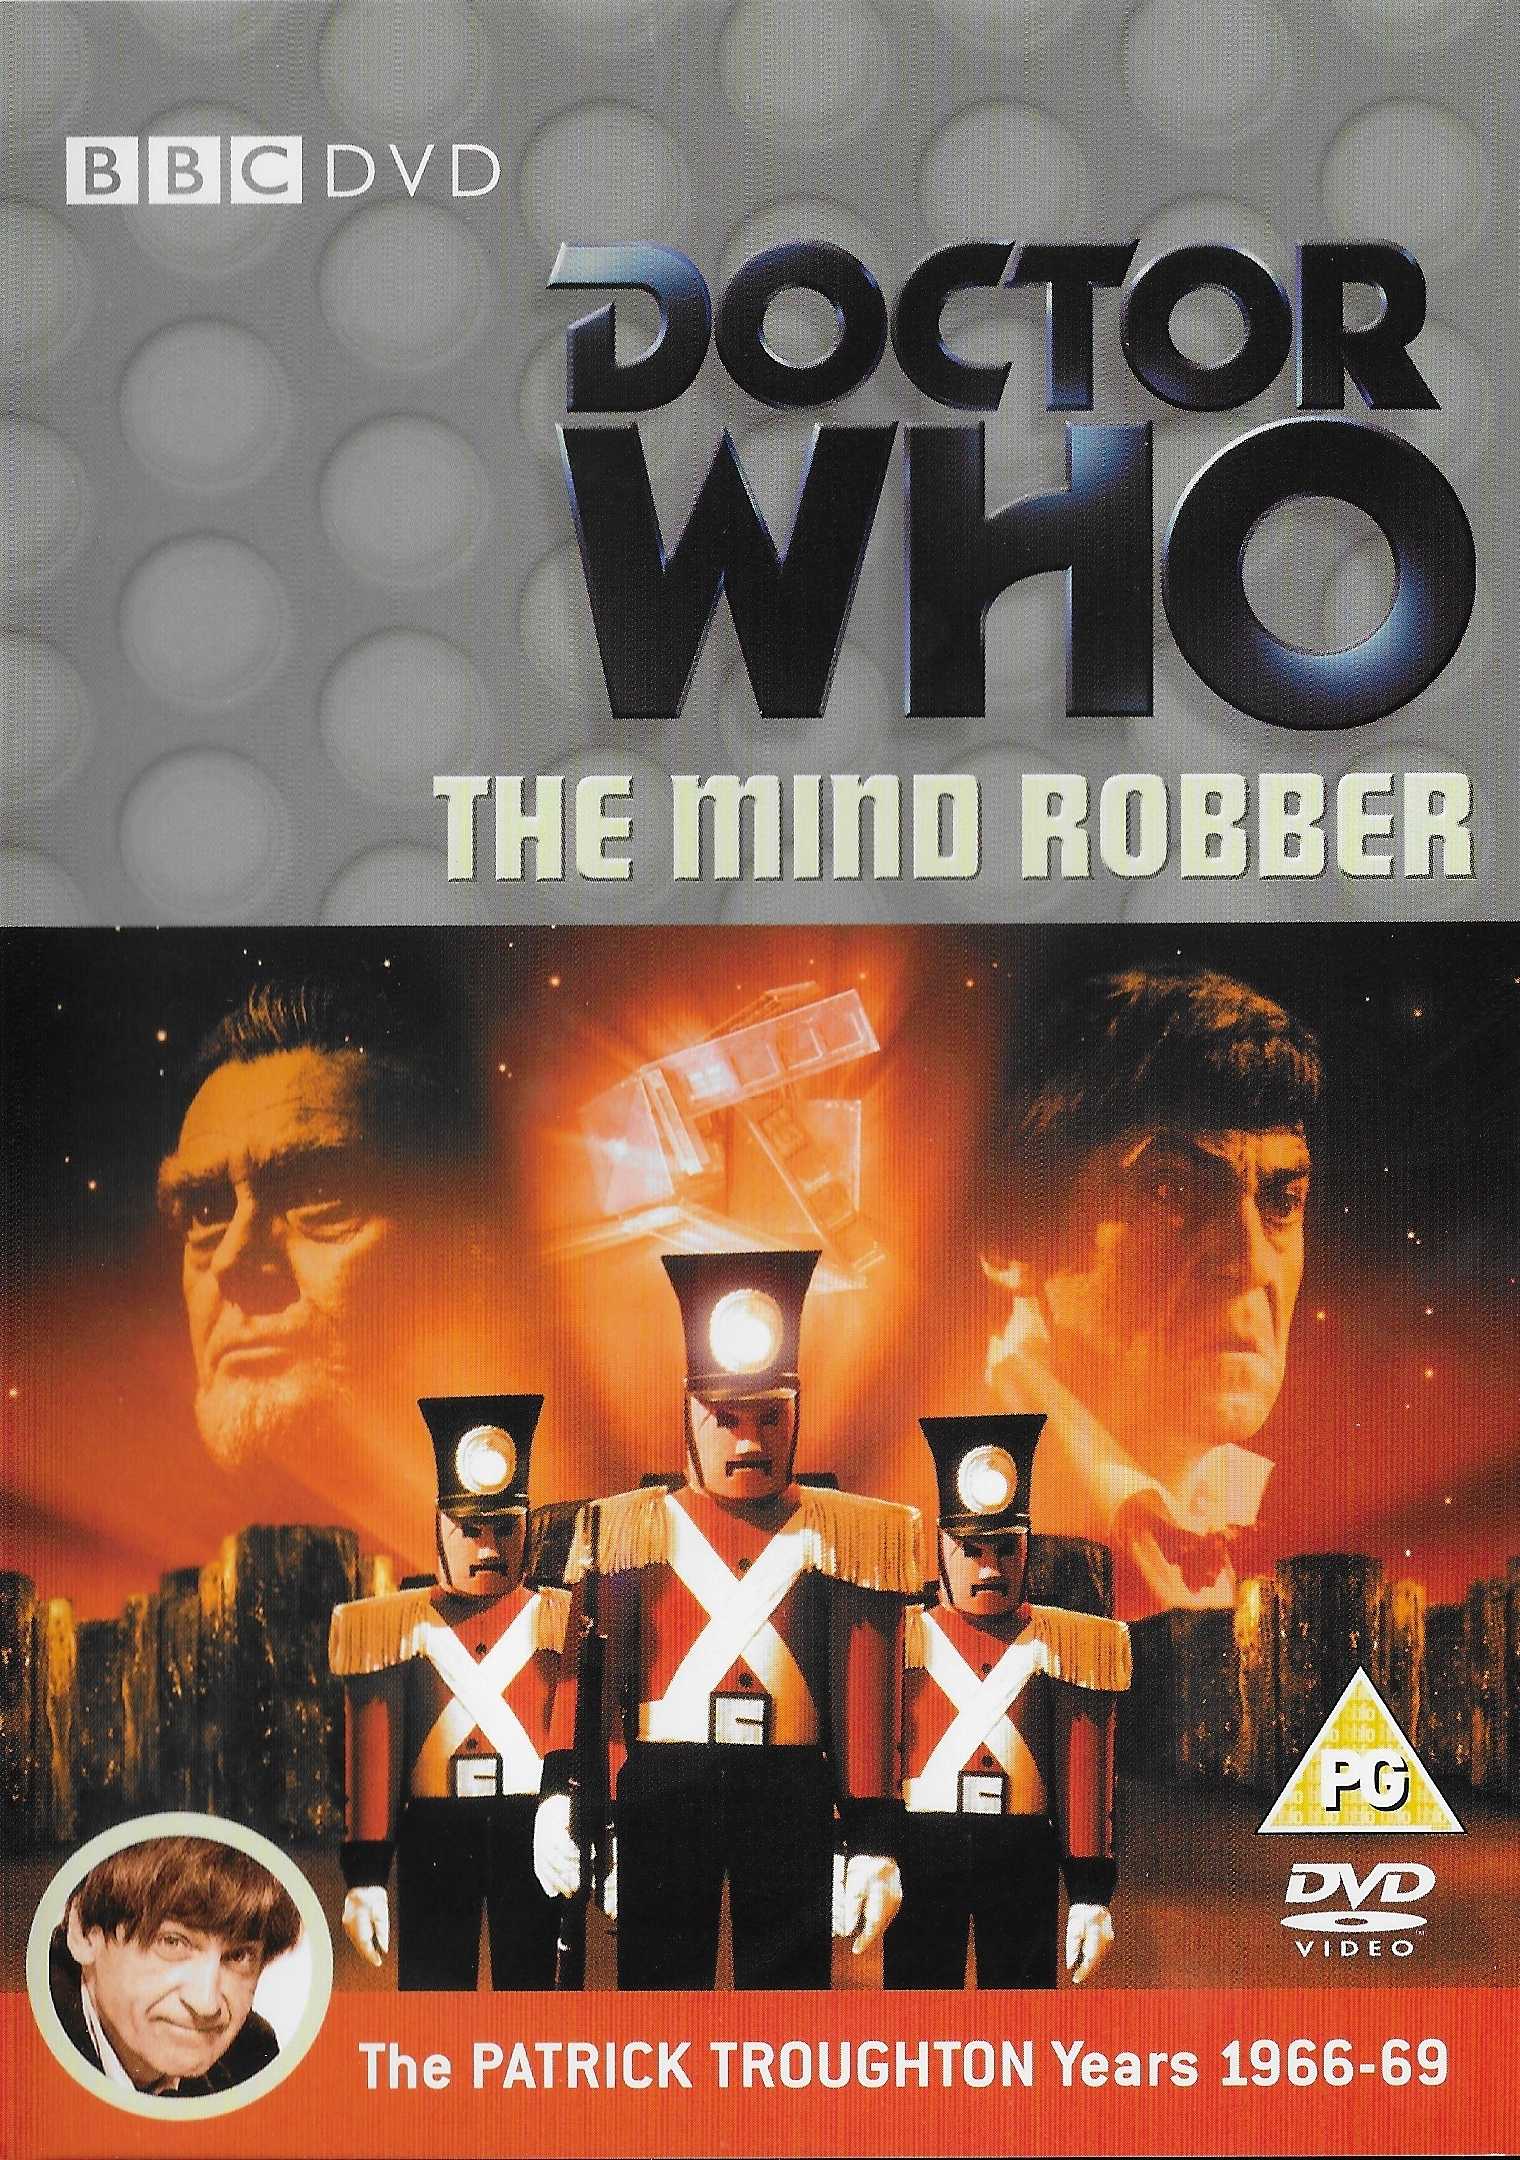 Picture of BBCDVD 1358 Doctor Who - The mind robber by artist Peter Ling from the BBC dvds - Records and Tapes library